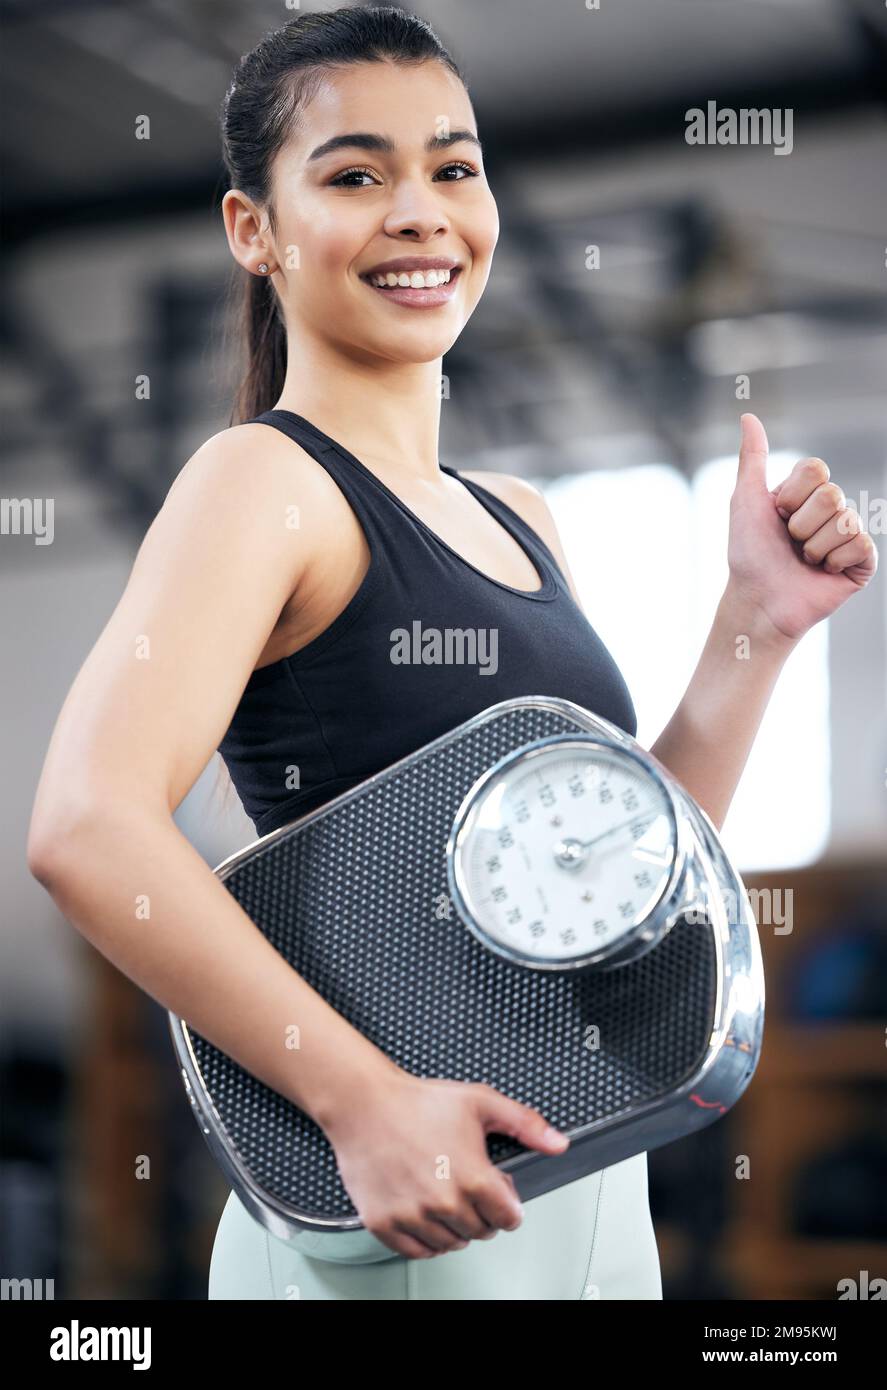 Im well on my way to reaching my goal weight. Portrait of a fit young woman holding a scale and showing thumbs up in a gym. Stock Photo